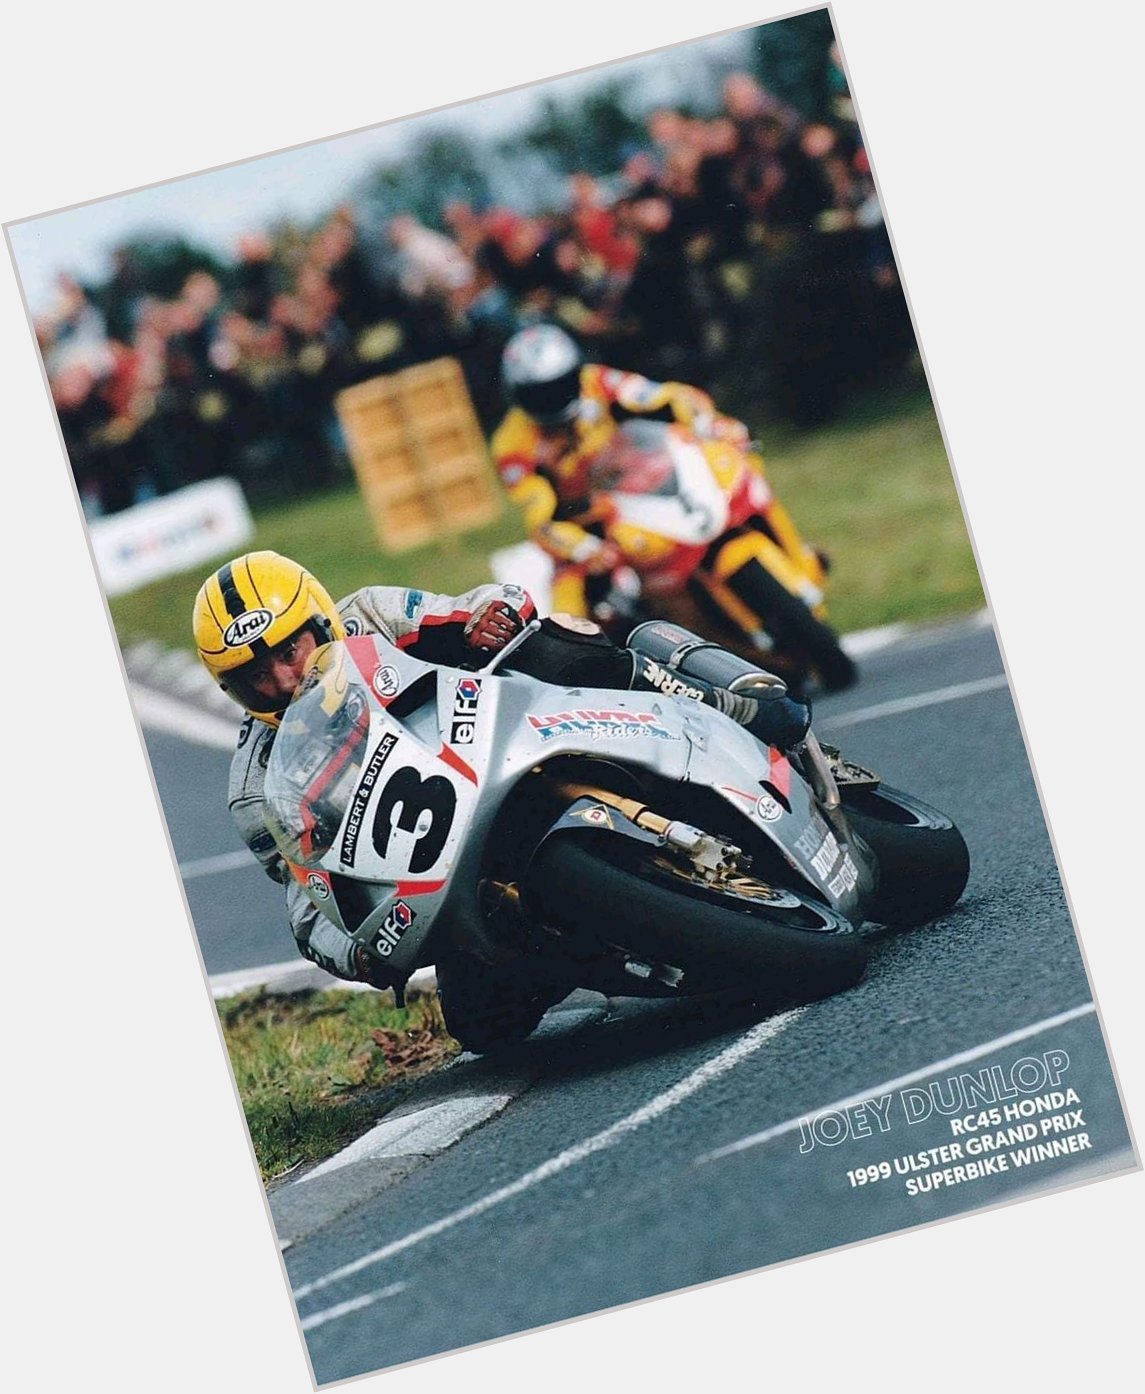 Happy 68th birthday to the king of the roads, Joey Dunlop. Legend 